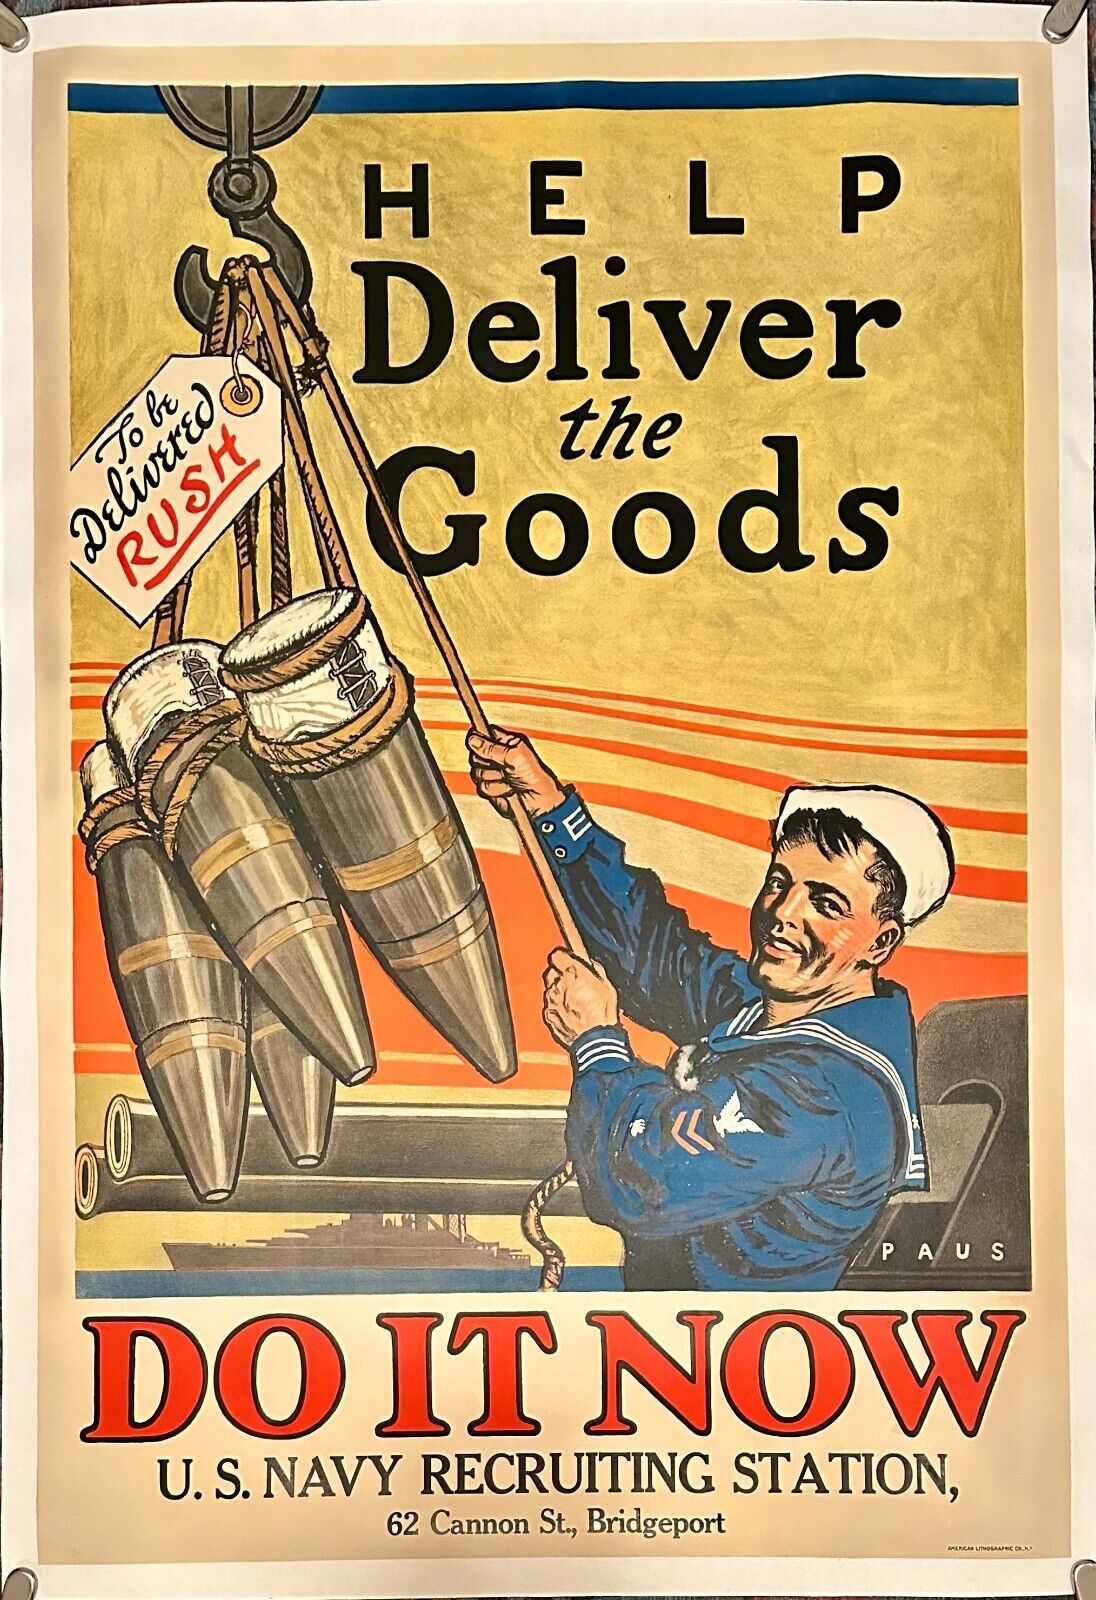 Original WWI US Navy Recruiting Poster Help Deliver  the Goods by Herbert Paus